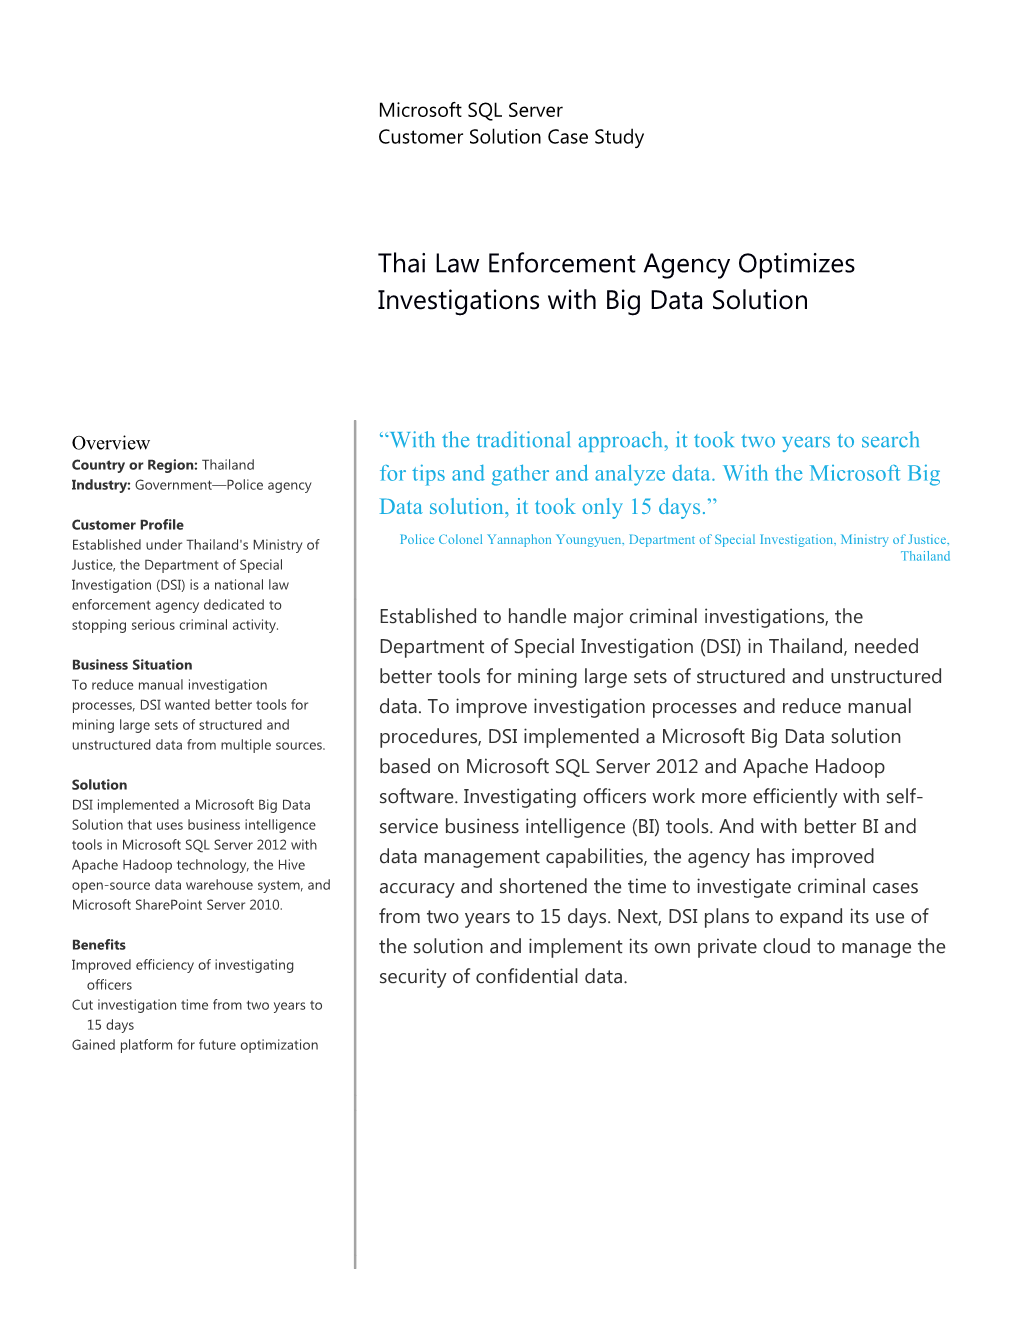 Thai Law Enforcement Agency Optimizes Investigations with Big Data Solution